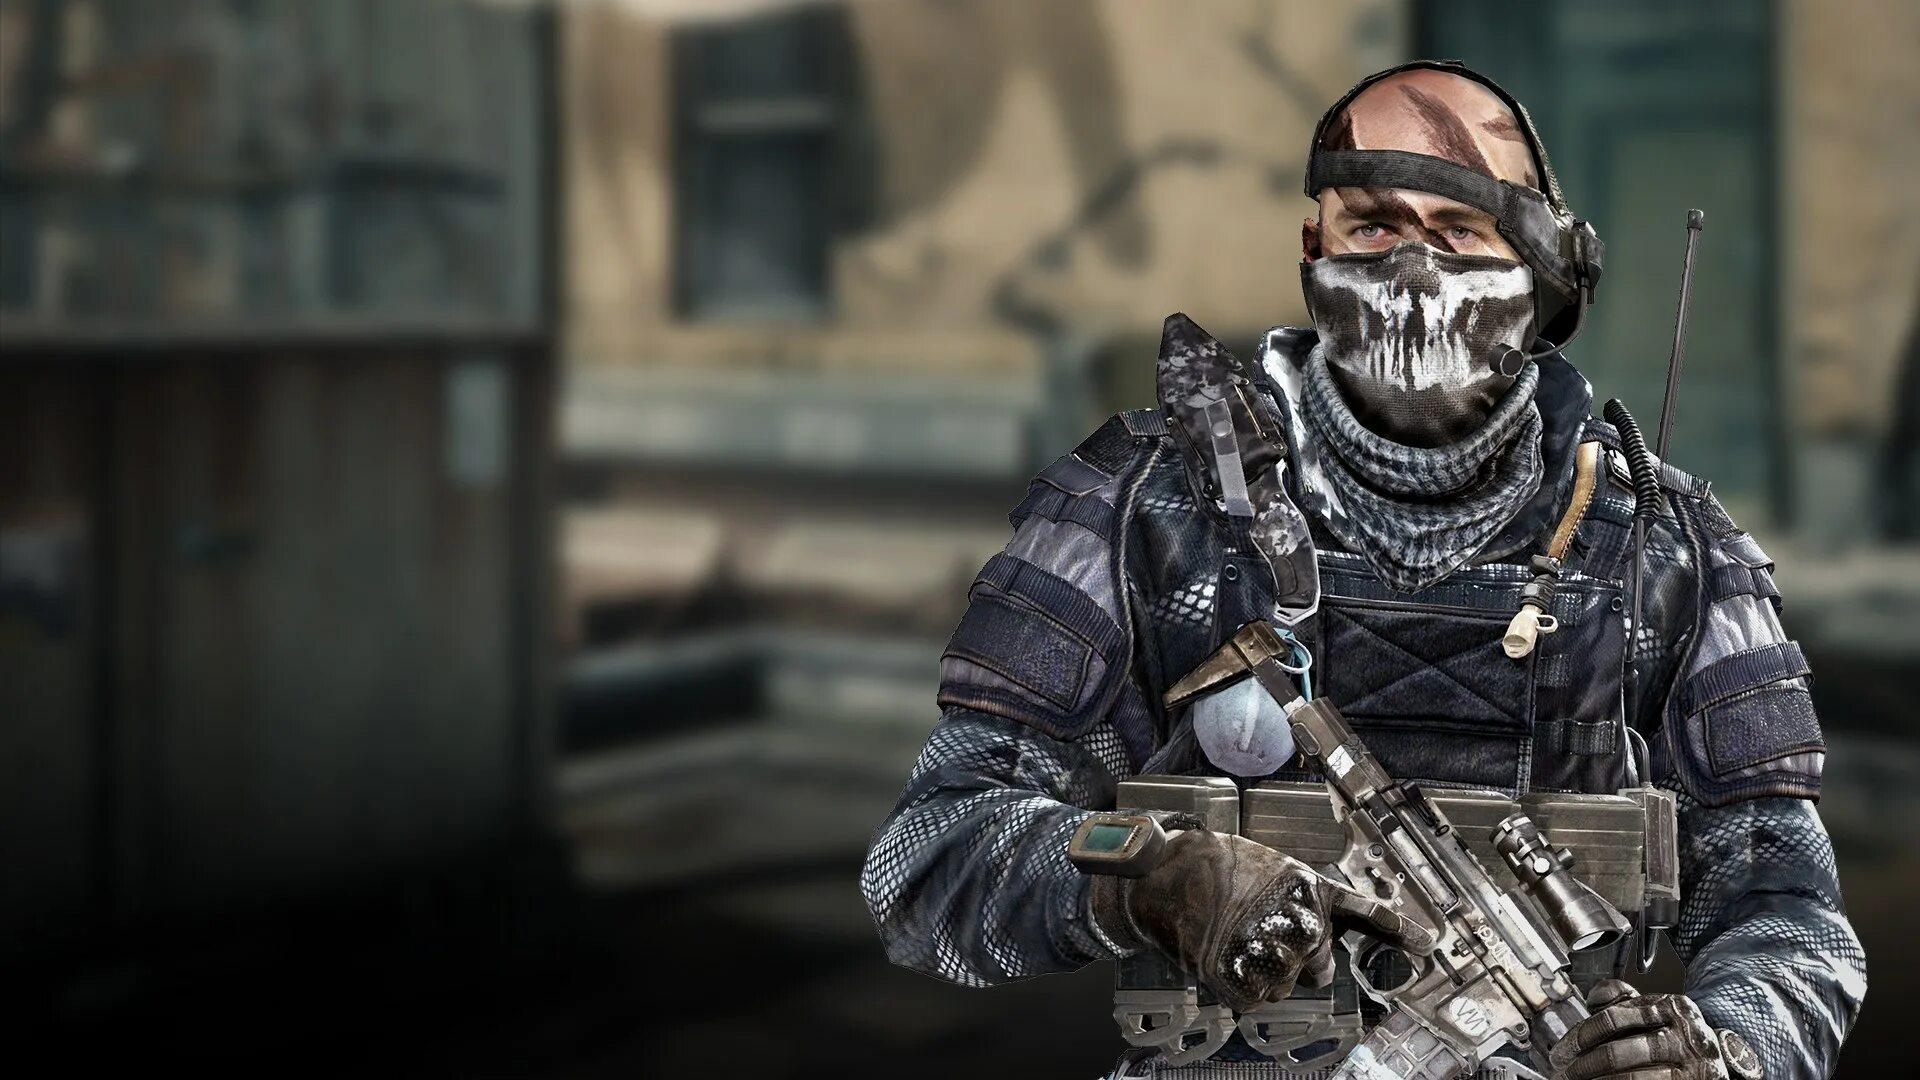 Гоуст Call of Duty. Call of Duty Ghosts гоуст. Меррик Call of Duty. Колда гоуст